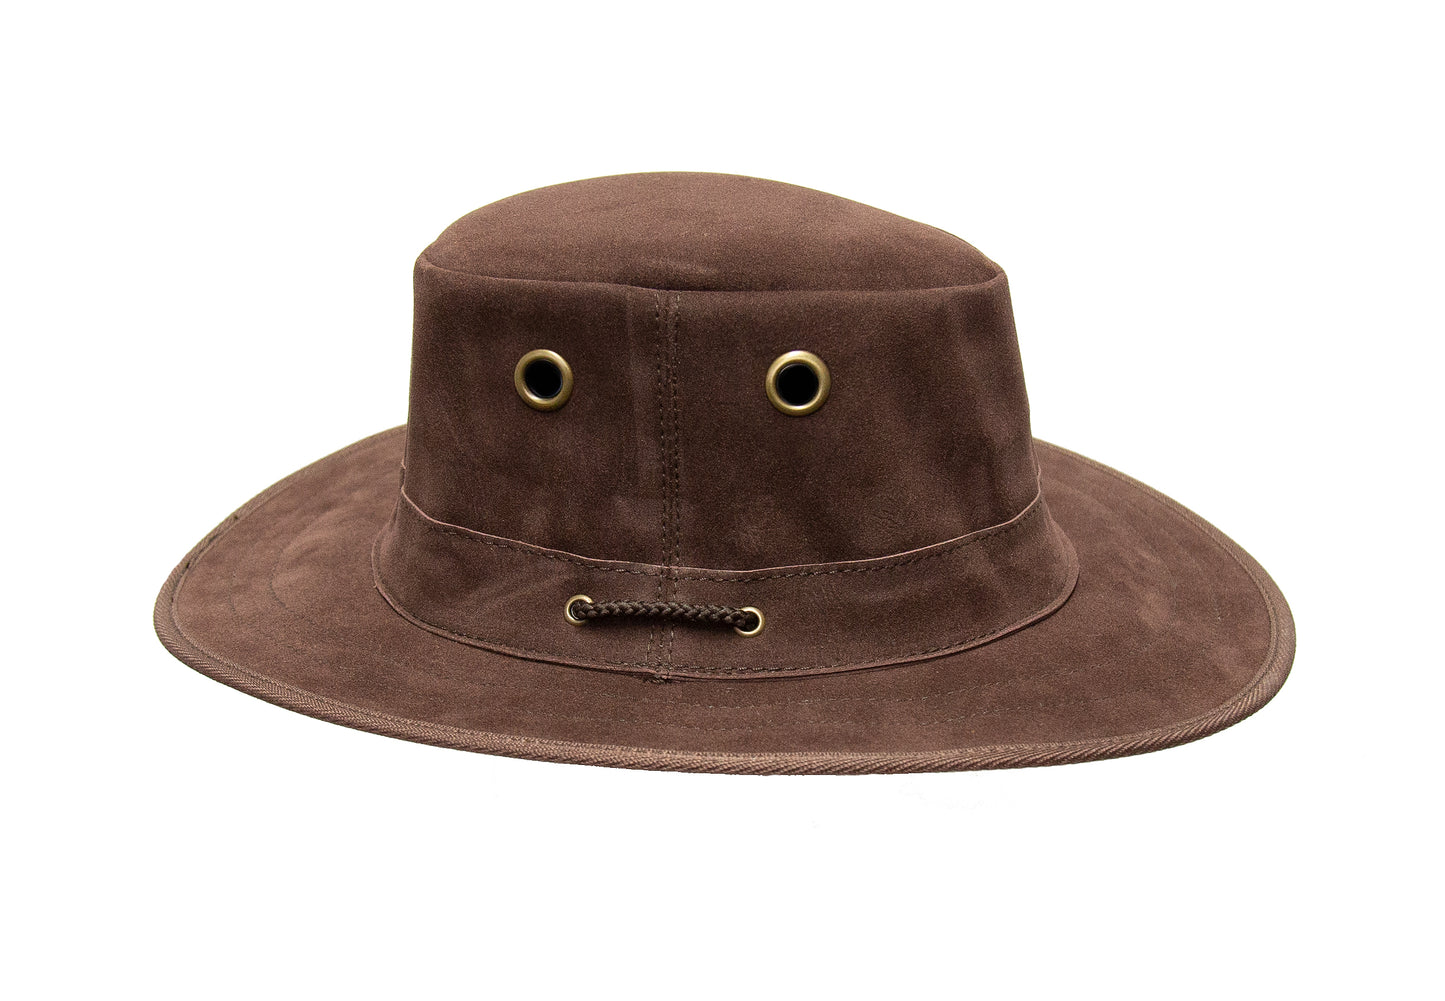 Children cowboy hat in wild leather optics chin band included